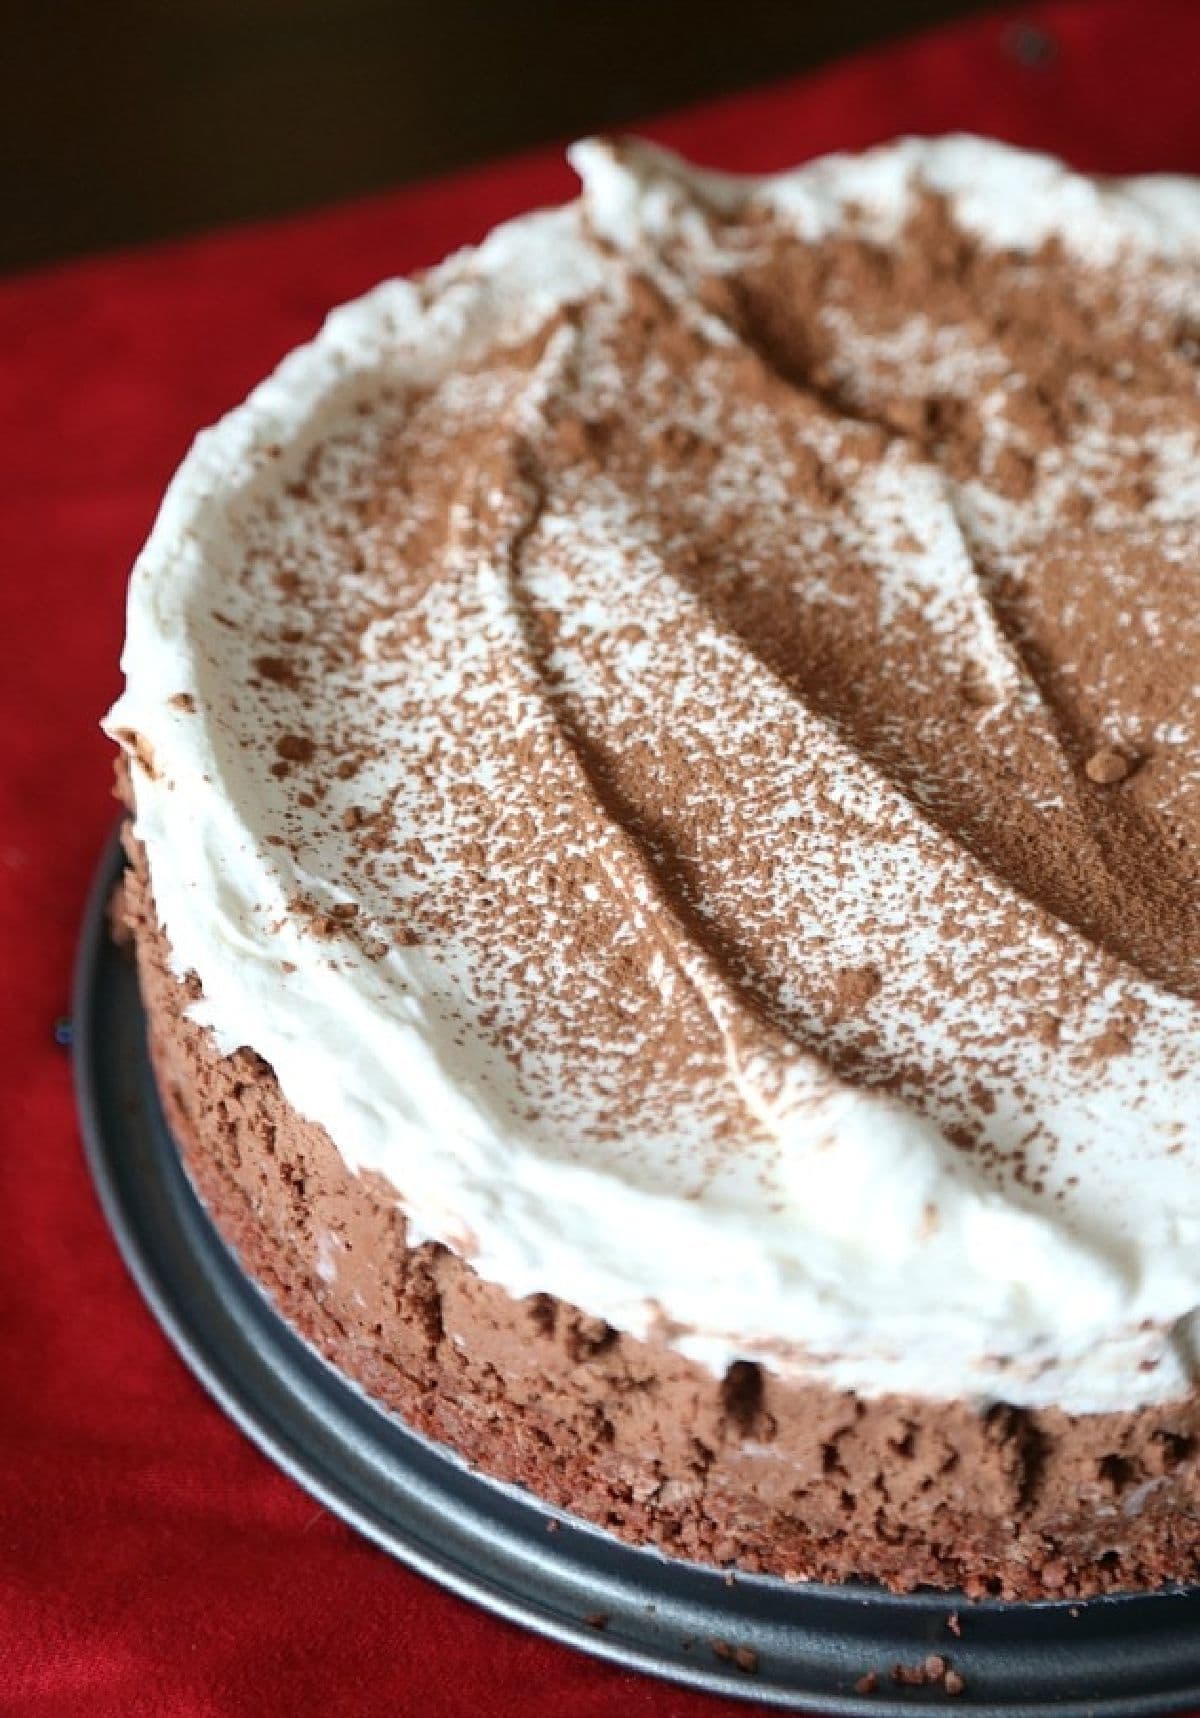 Sugar Wafer Chocolate Mousse Pie dusted with cocoa powder